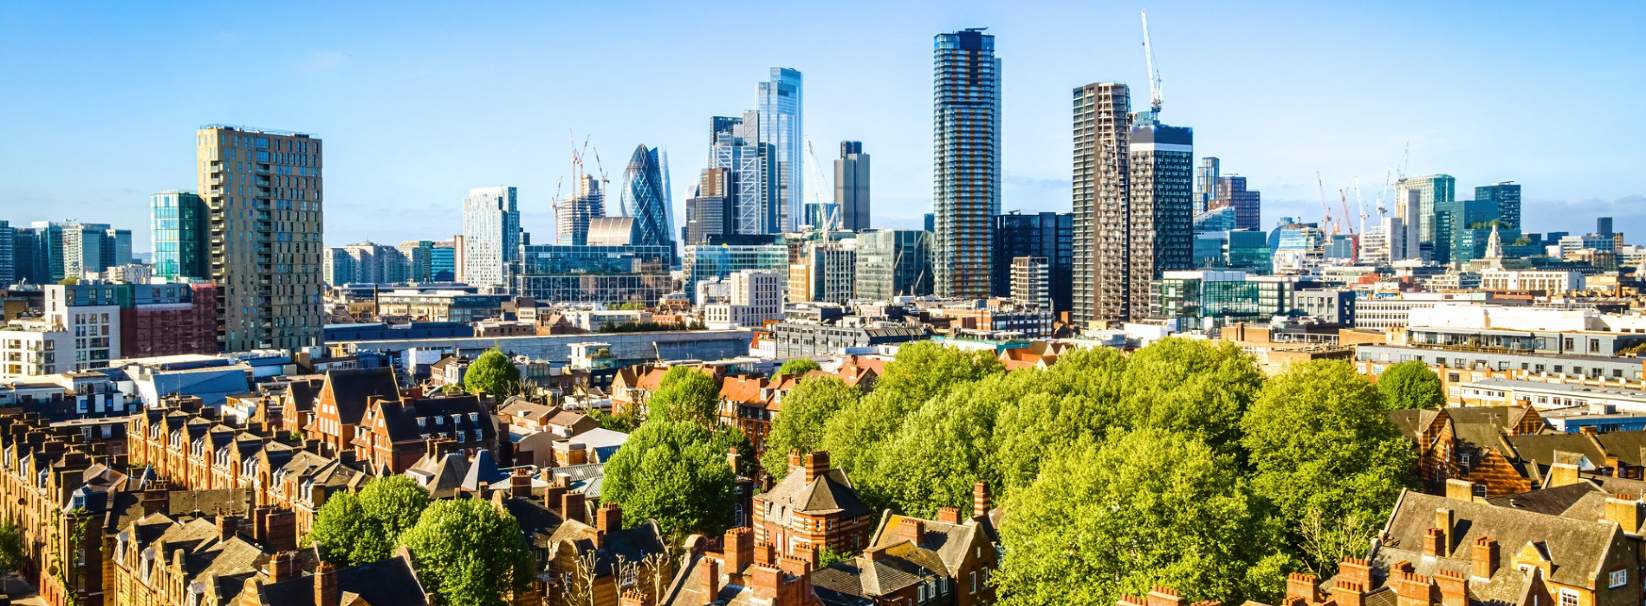 How will London deliver the homes it needs?